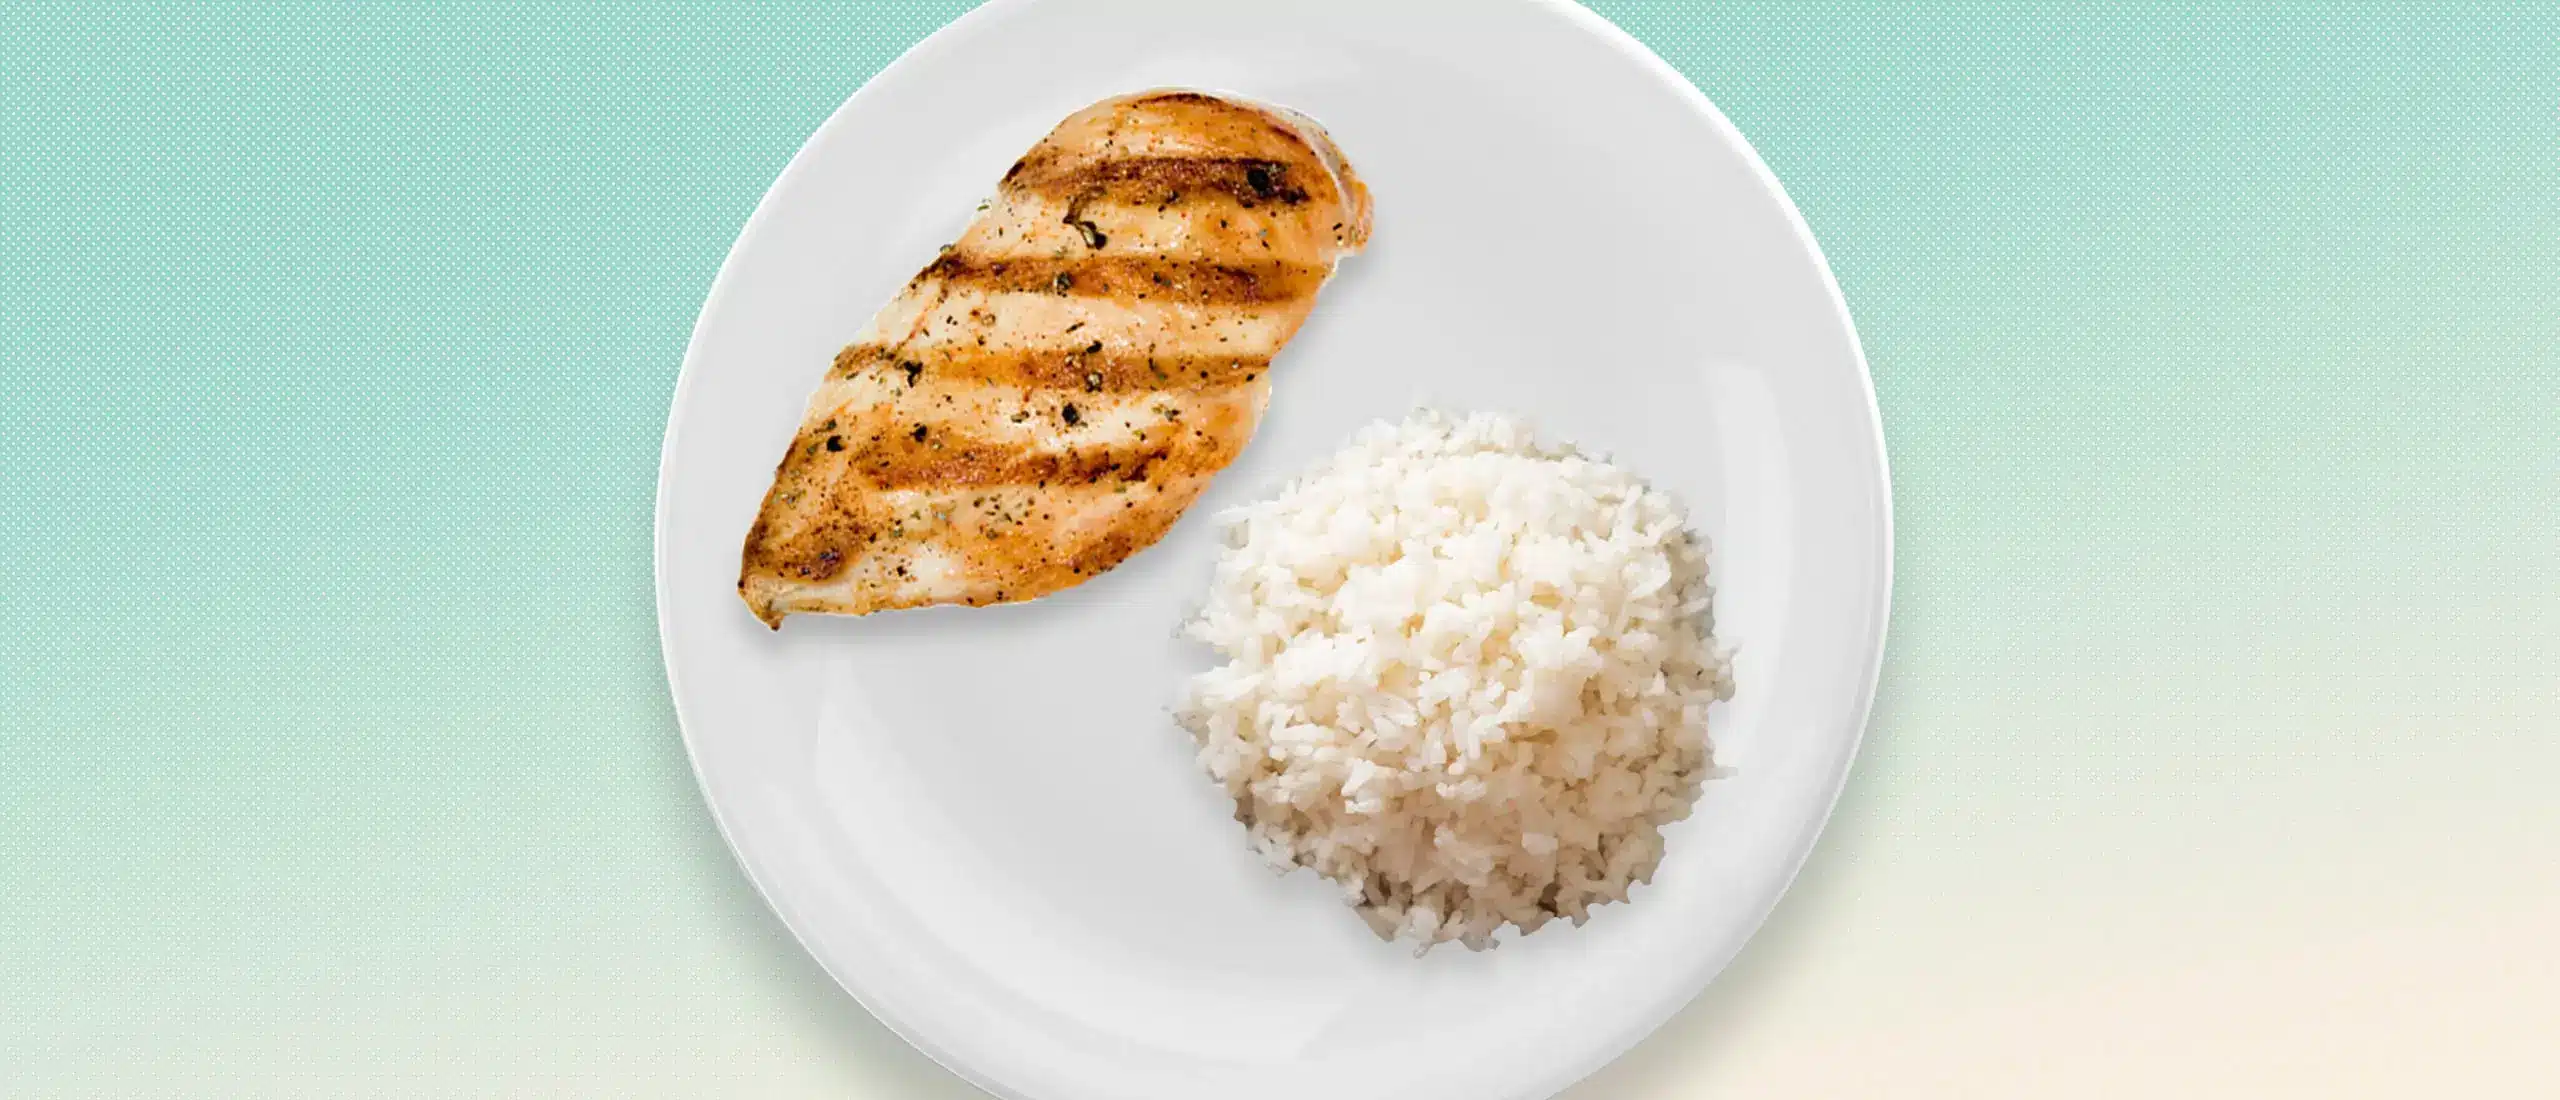 Chicken and rice on a plate